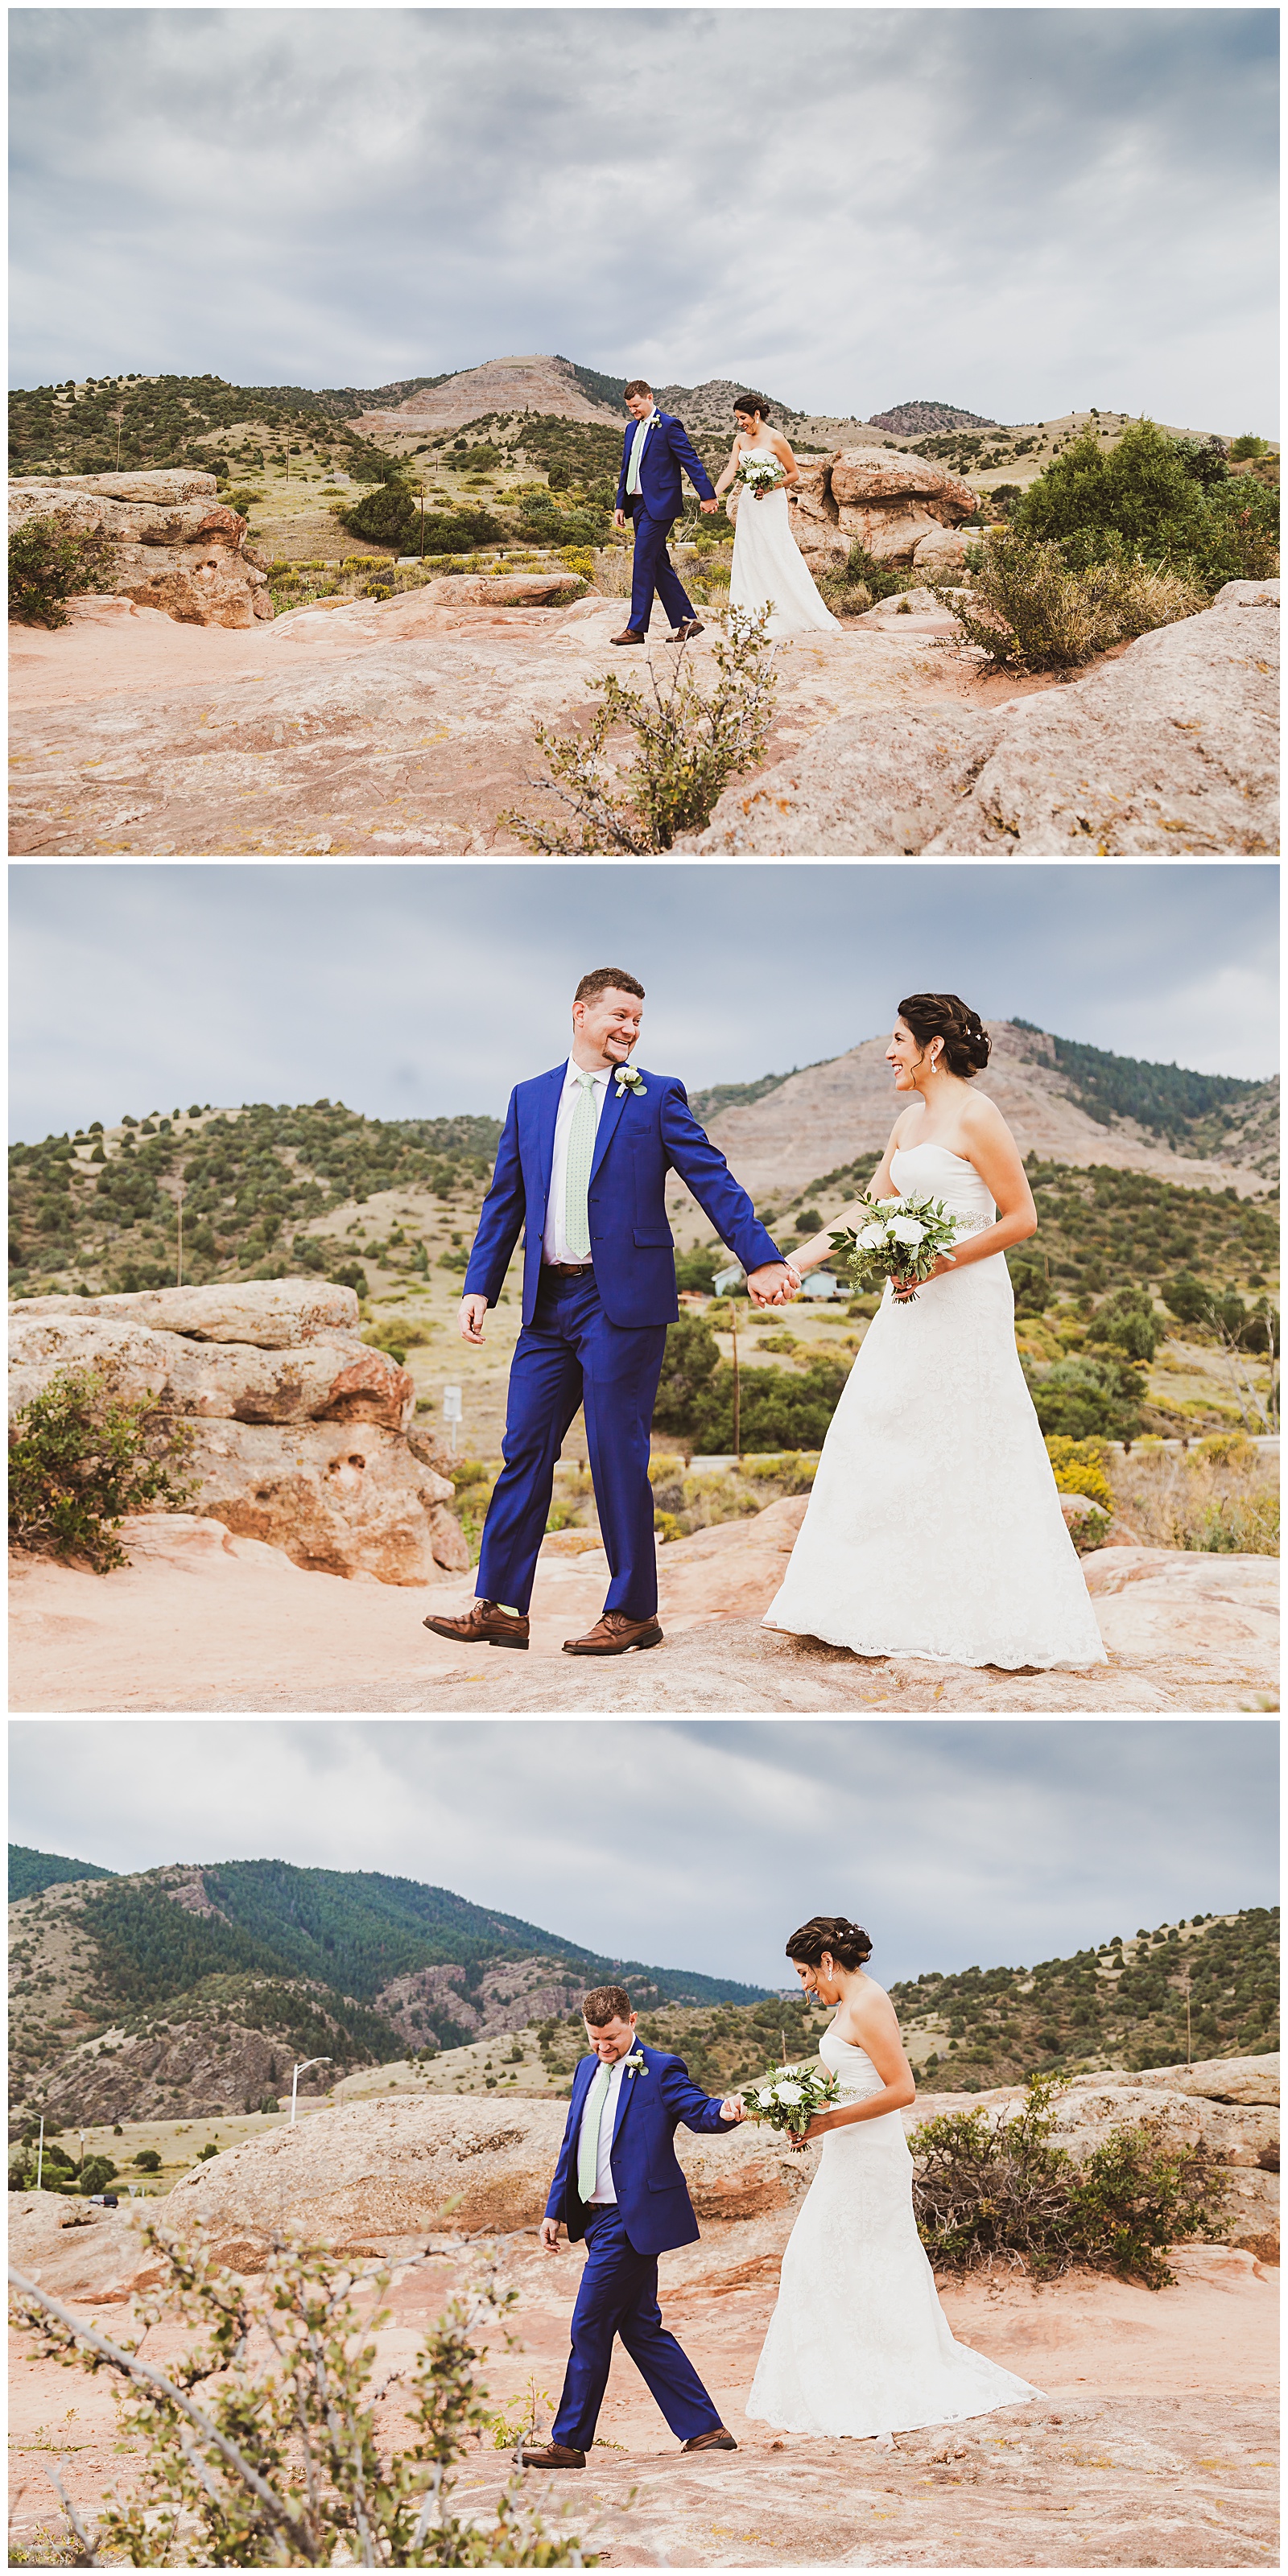 beautiful couples photos at willow ridge manor in morrison, co